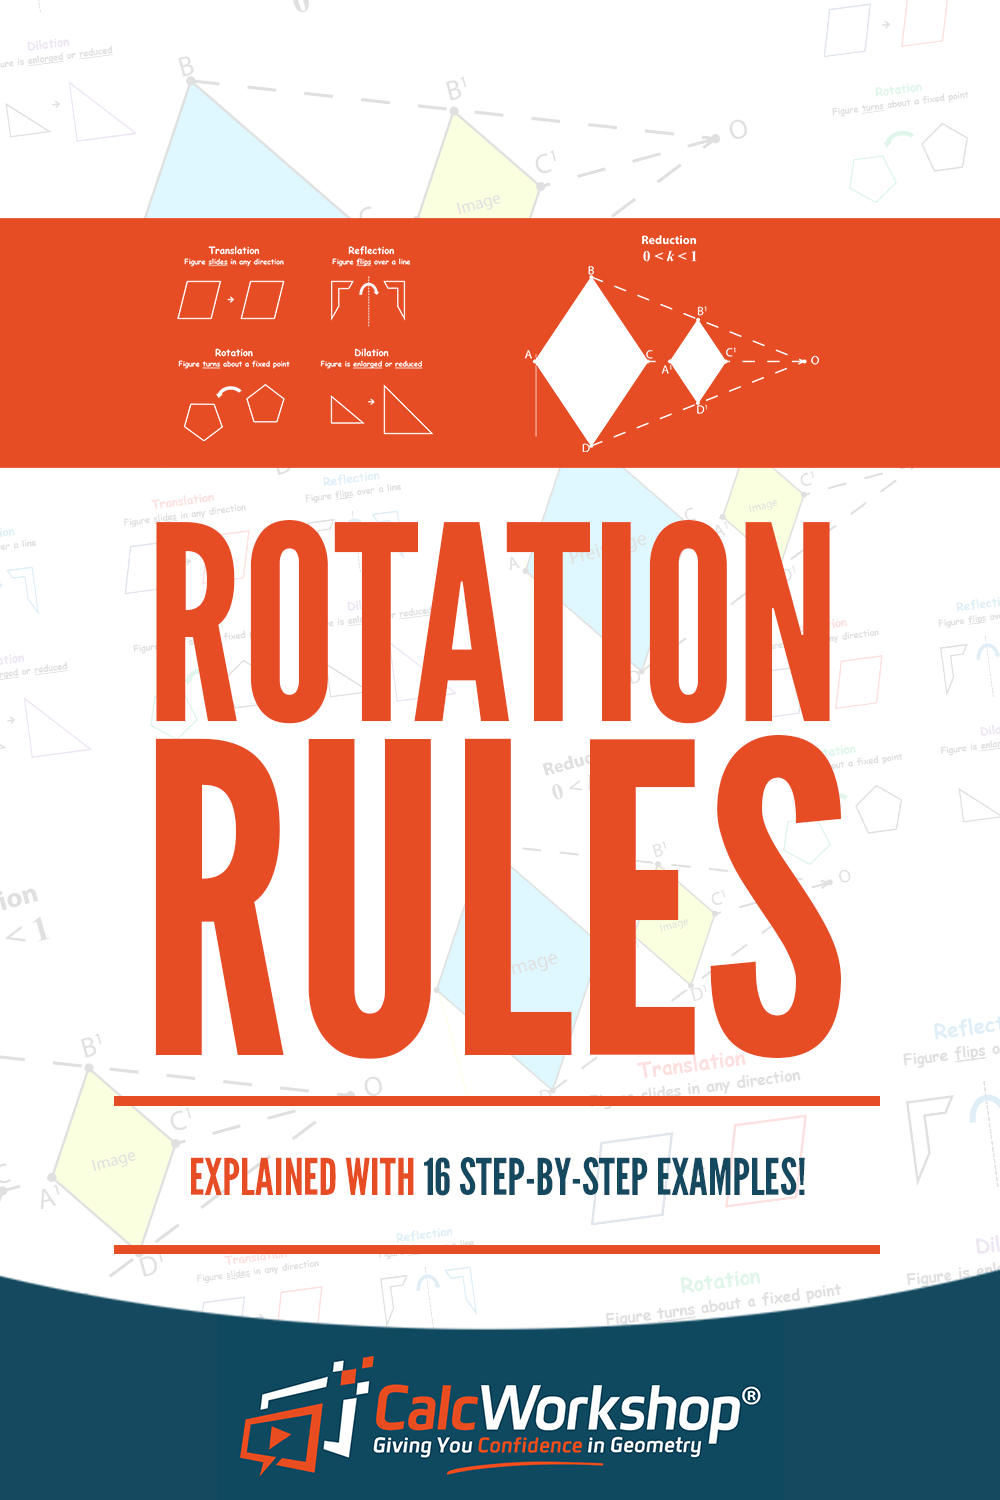 Rotation Rules (Explained w/ 16 Step-by-Step Examples!)